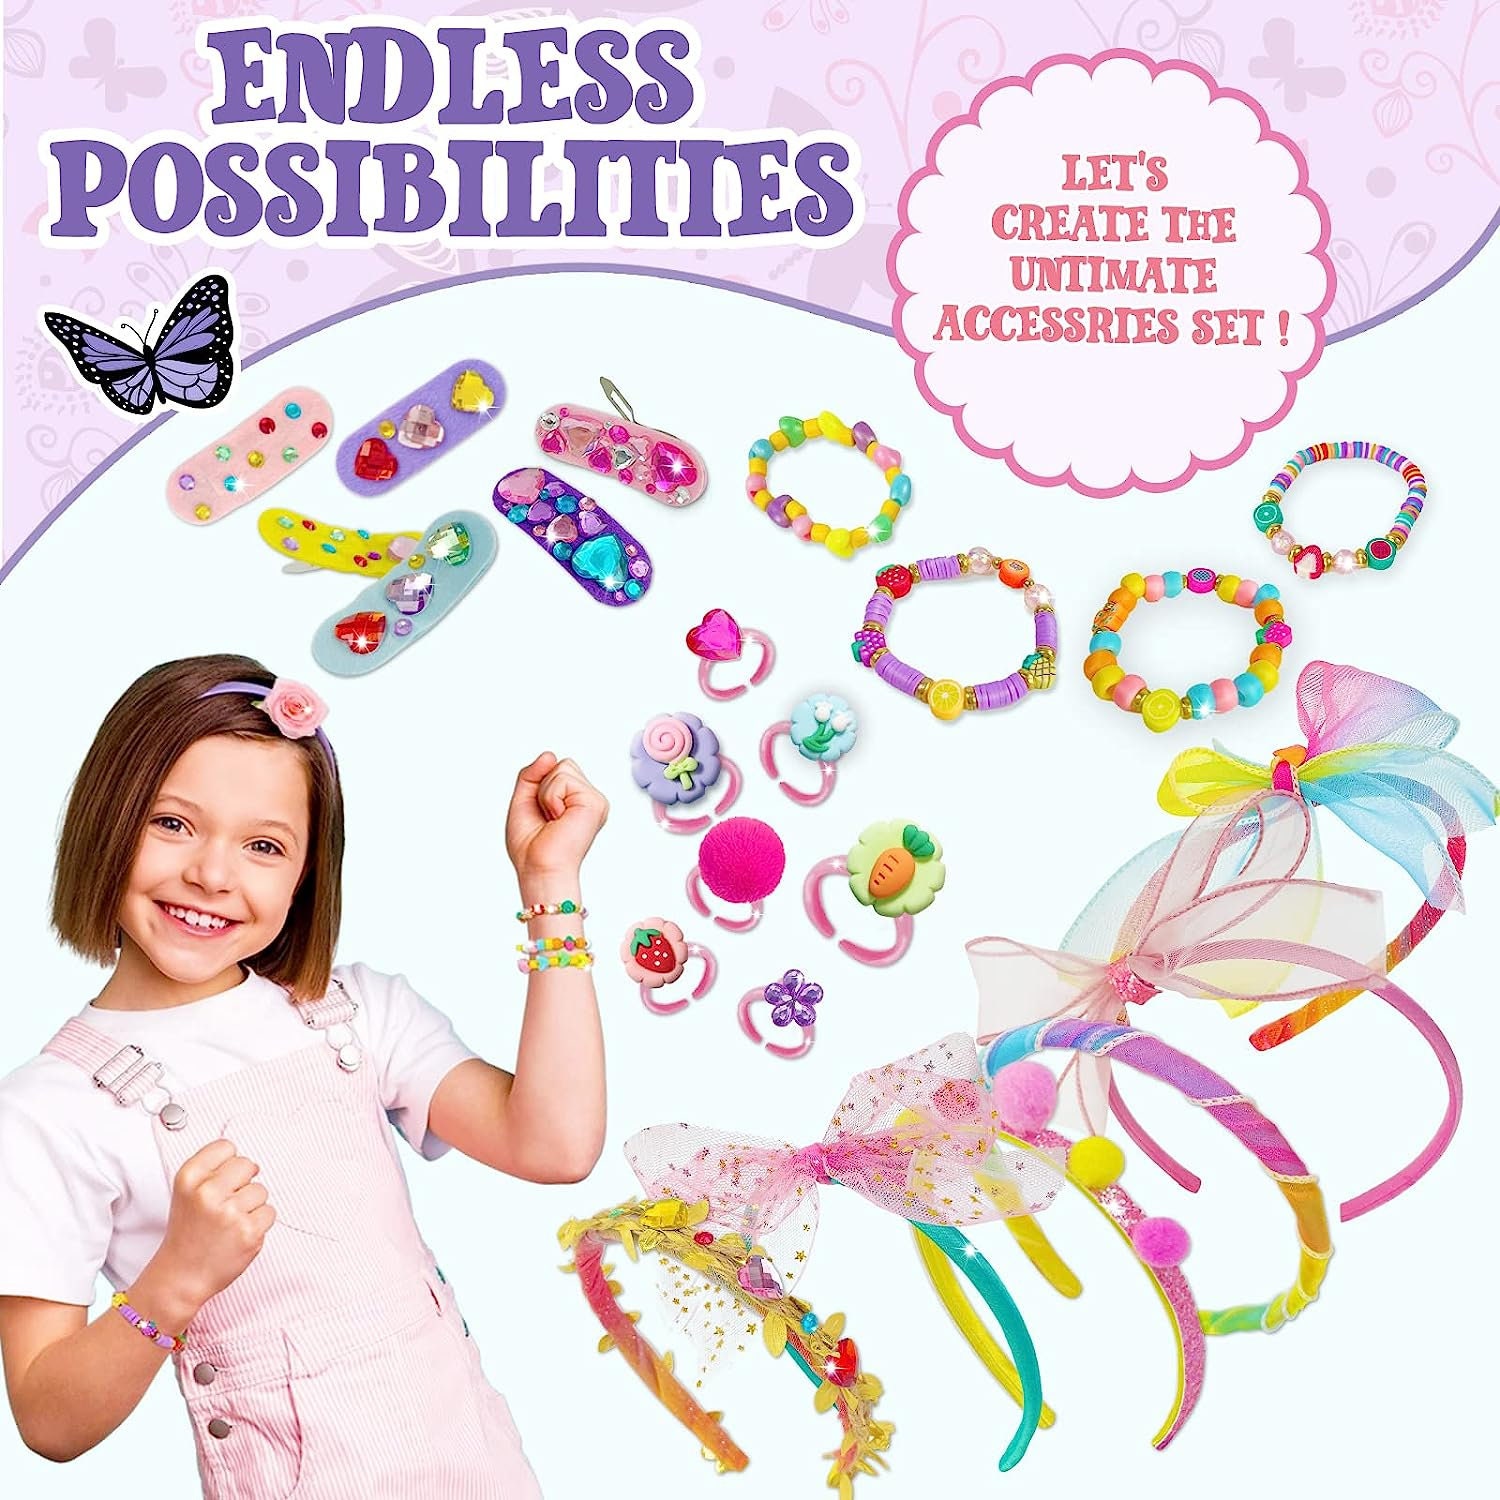  Humerry DIY Headband Making Kit for Girls, Hair Accessories for  Girls Ages 5-12, Make Your Own Fashion Headbands for Kids, Birthday Arts  and Crafts Gifts for 5 Year Old Girls 